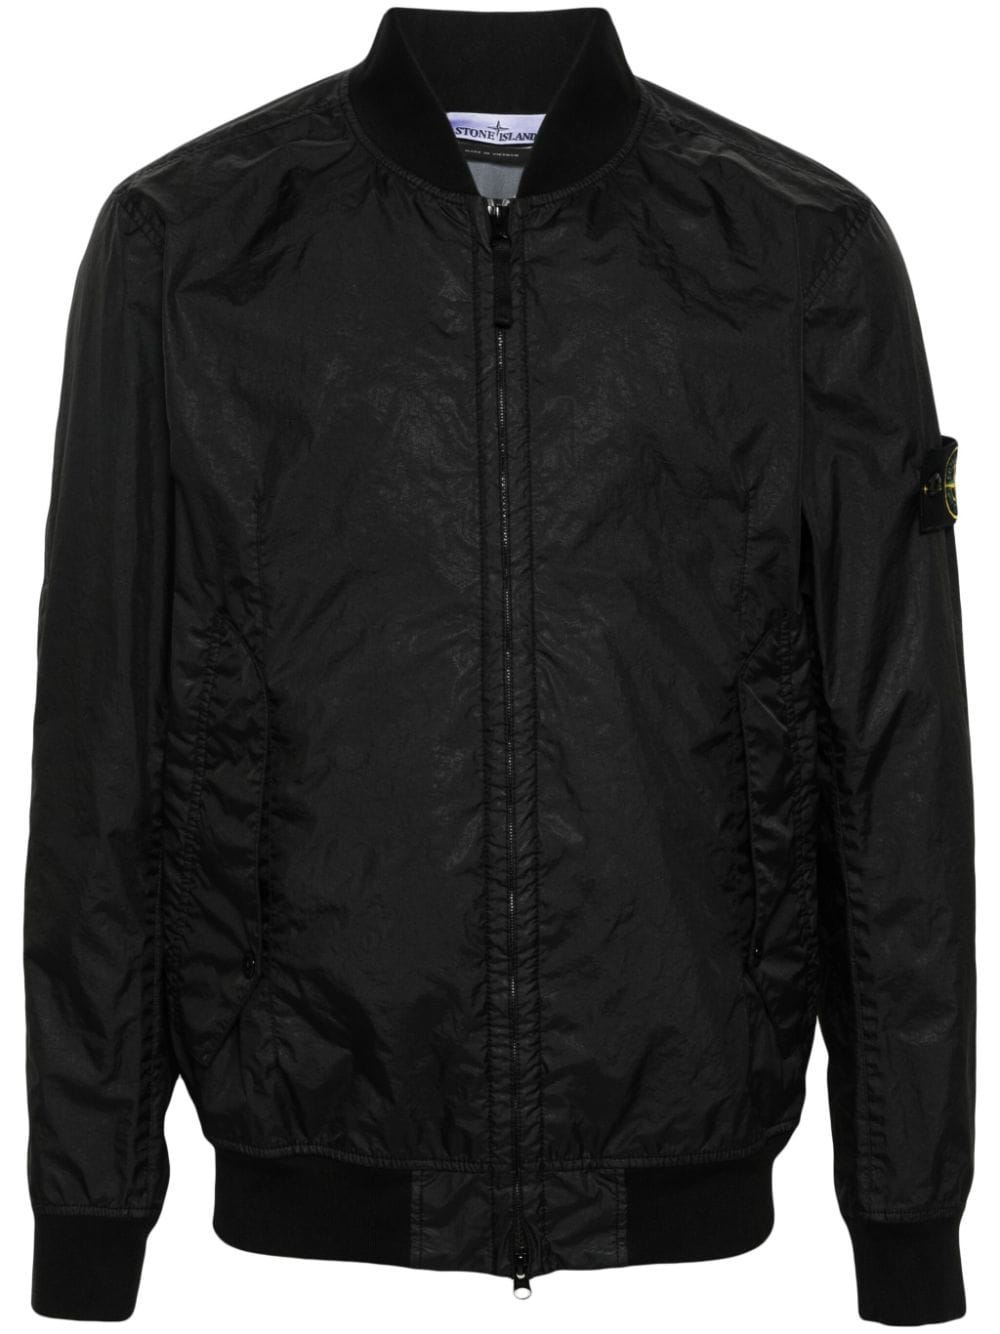 STONE ISLAND Black Crinkled Bomber Jacket for Men from SS24 Collection